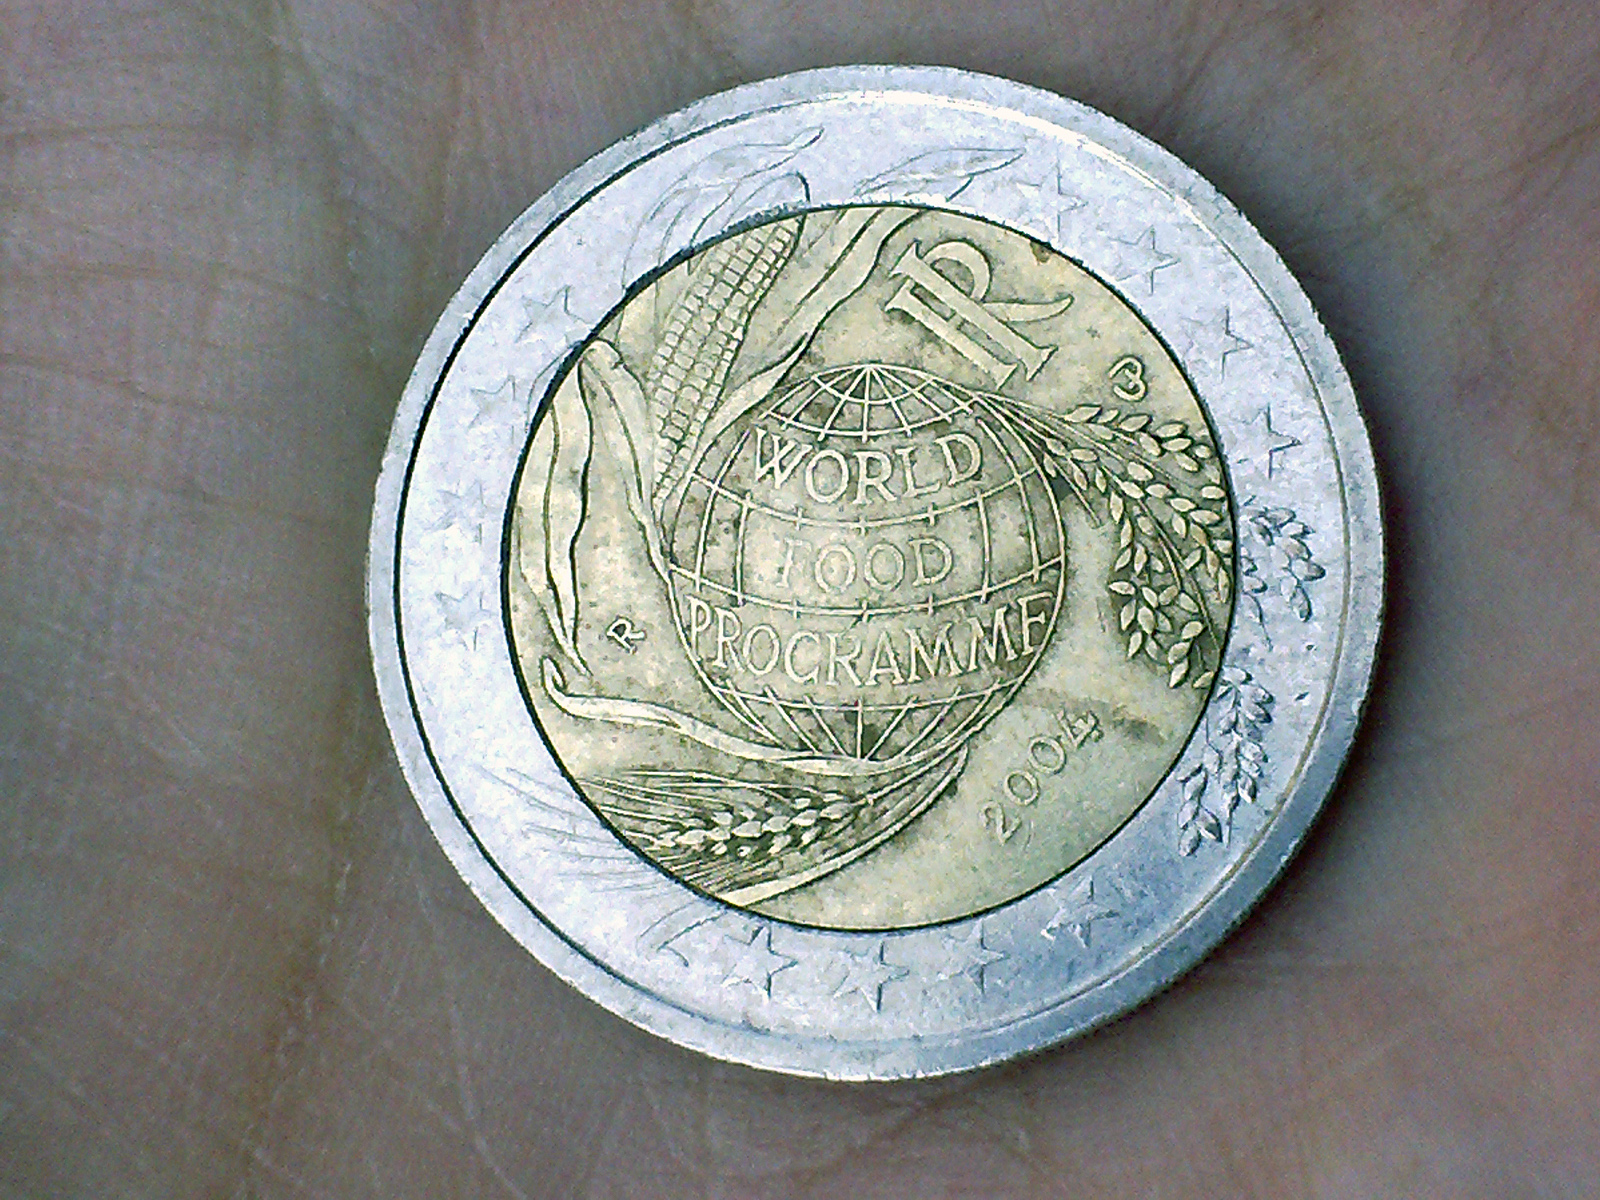 a person is holding a coin with an image on it